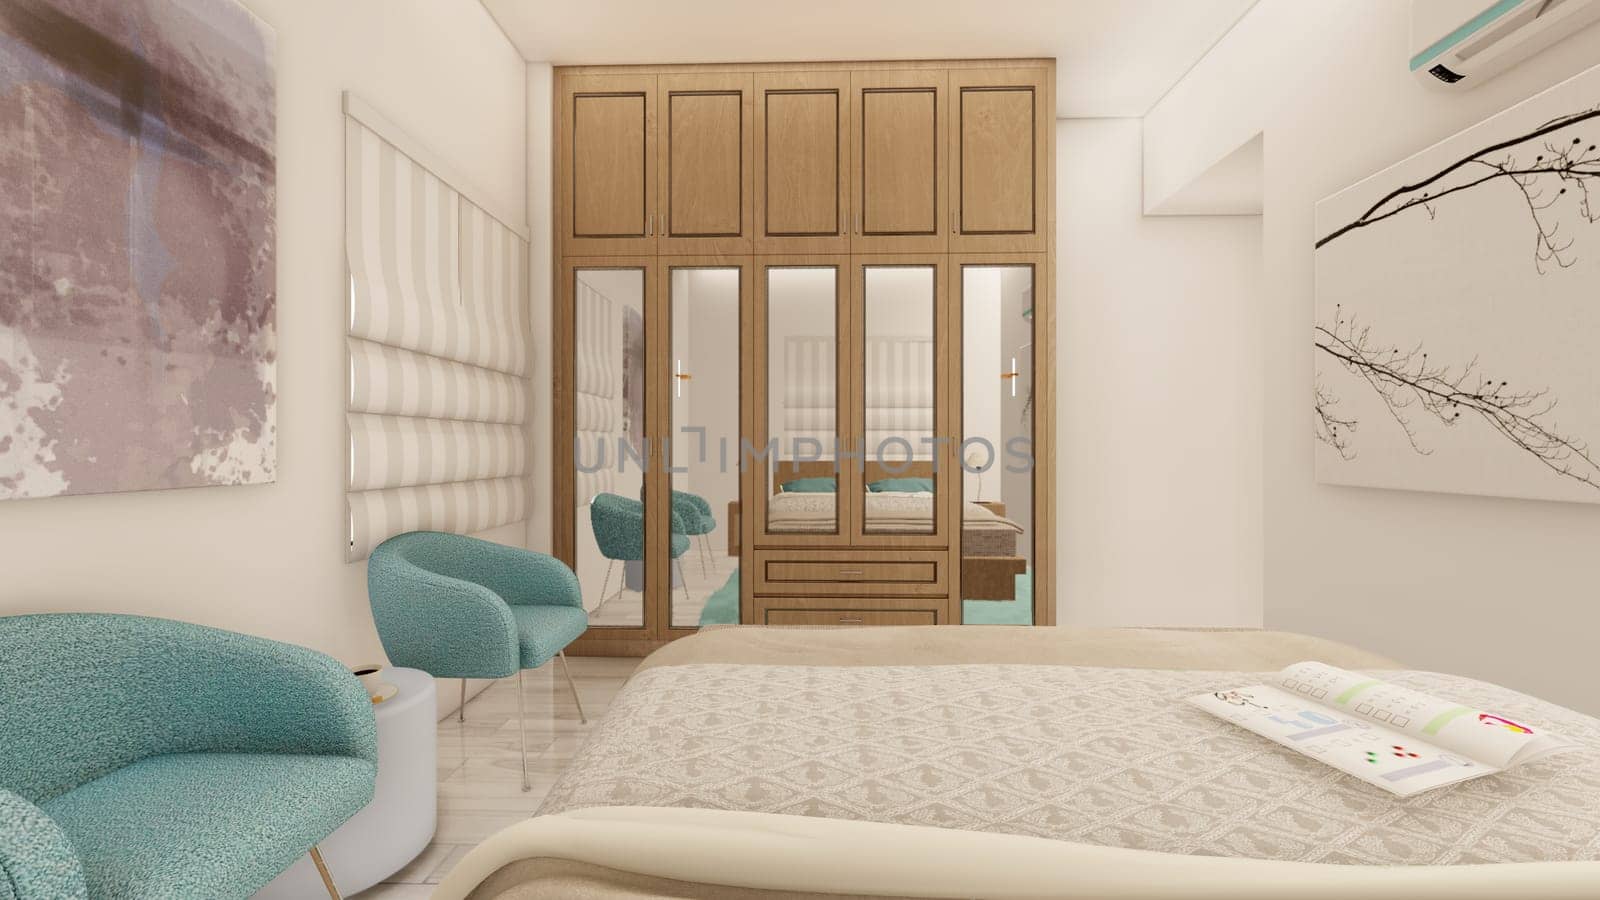 Realistic bedroom one point perspective by shawlinmohd